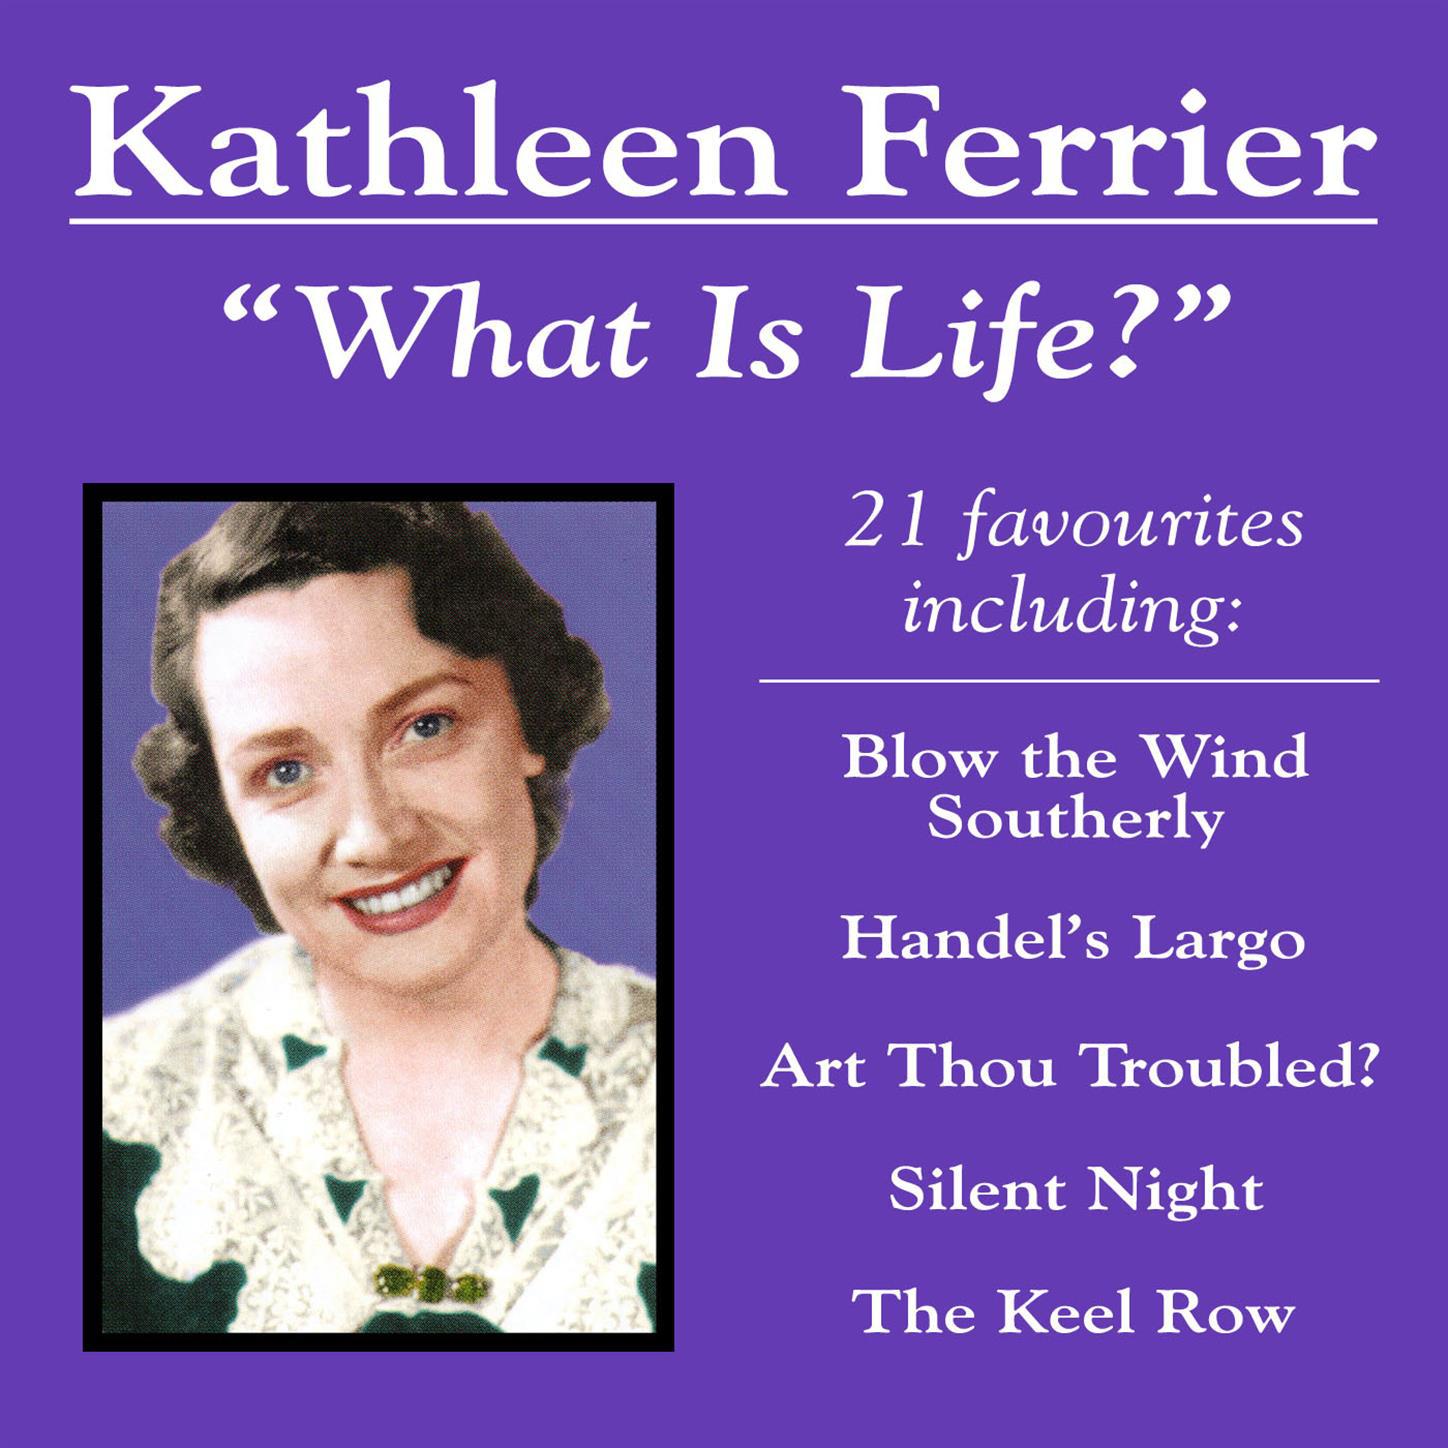 Interview with Kathleen Ferrier, Montreal, 1950: Interview with Kathleen Ferrier, Montreal, 1950